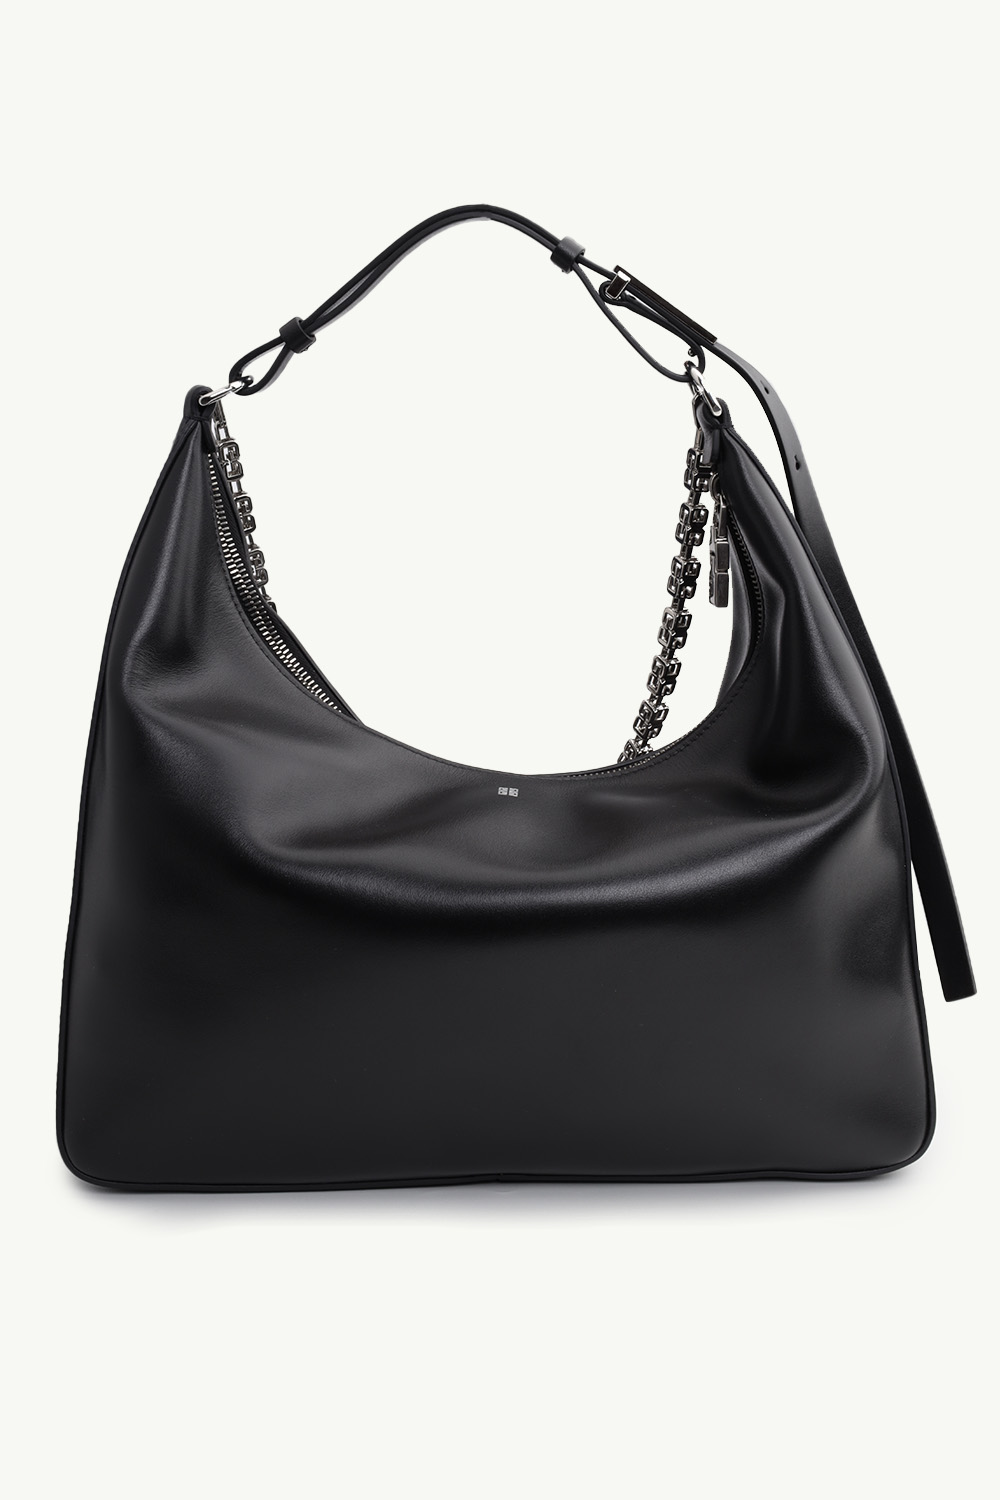 GIVENCHY Medium Moon Cut Out Bag in Black Smooth Leather 1